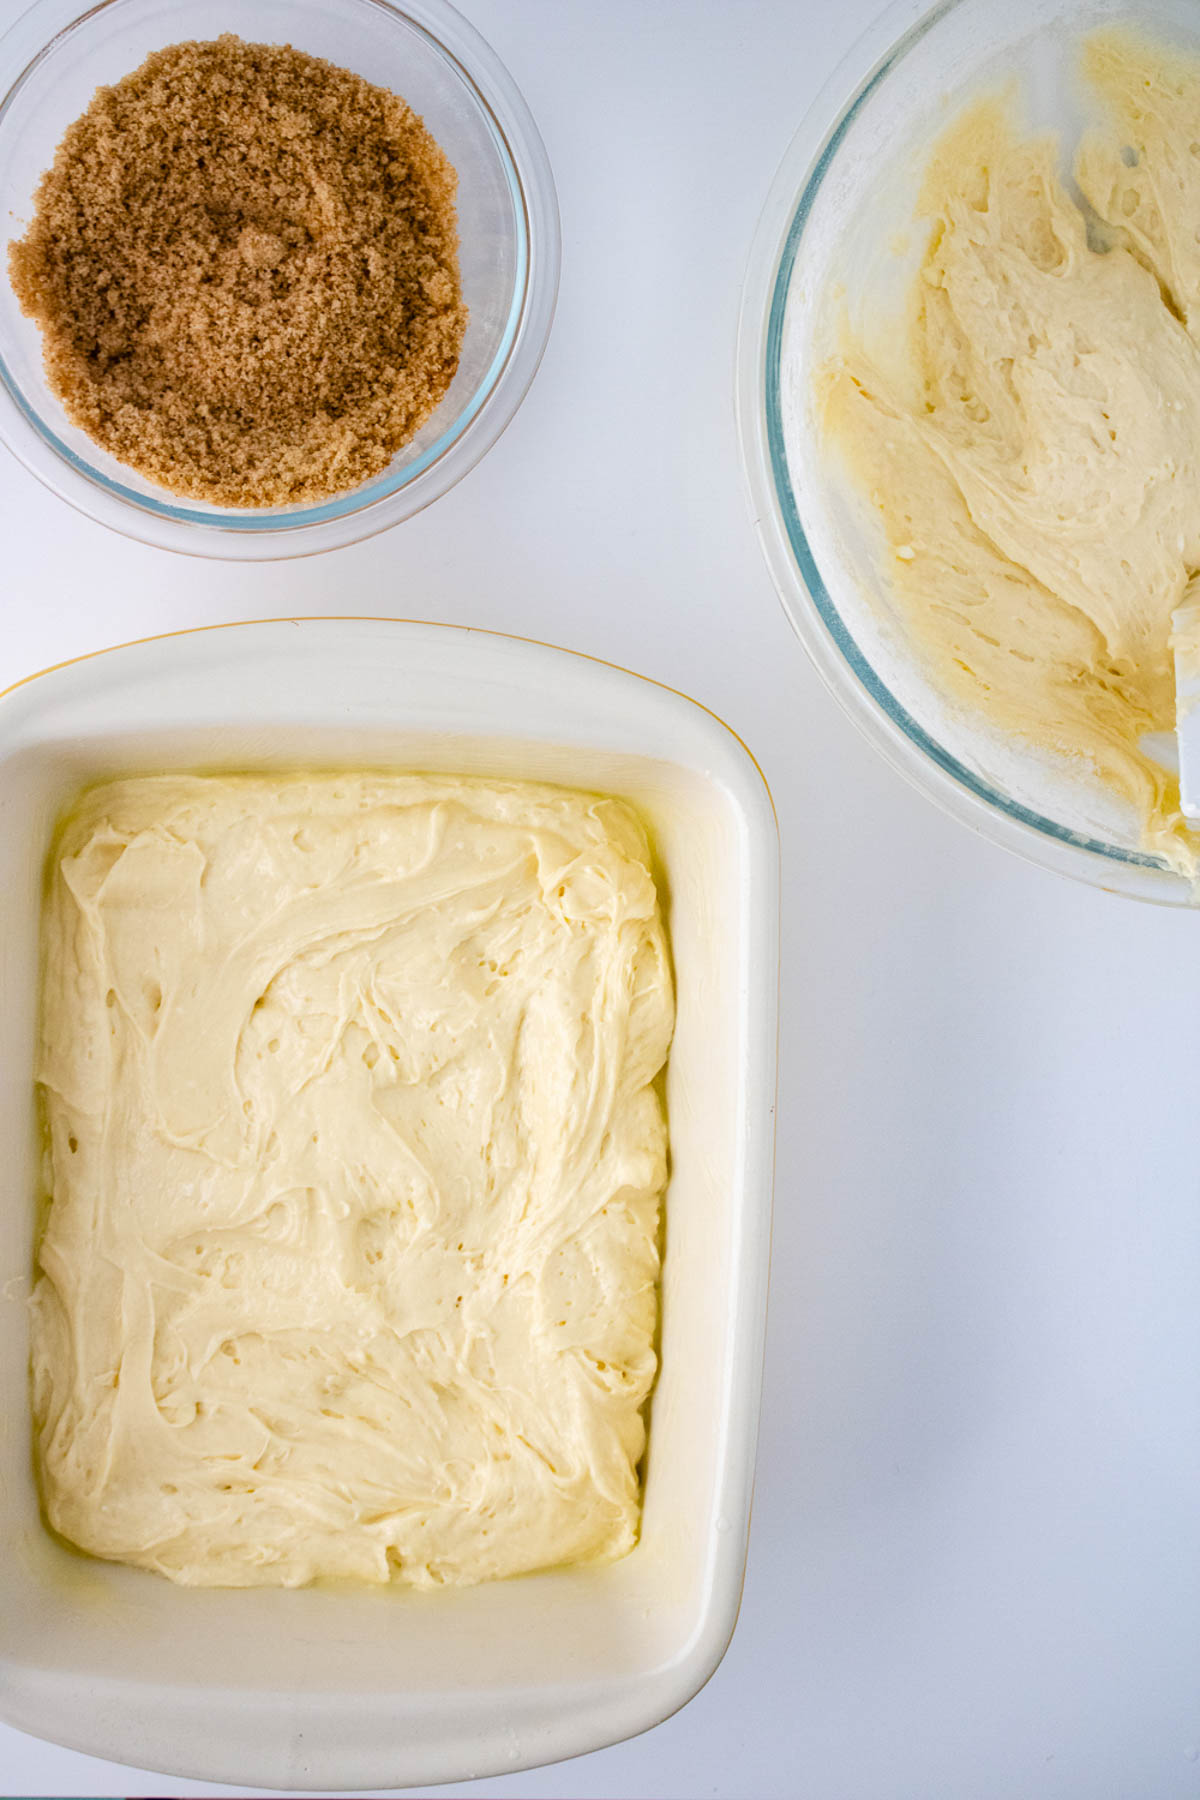 Top view of a baking dish with uncooked honey bun cake batter, a bowl with creamy mixture, and a bowl of brown sugar, all on a white surface.